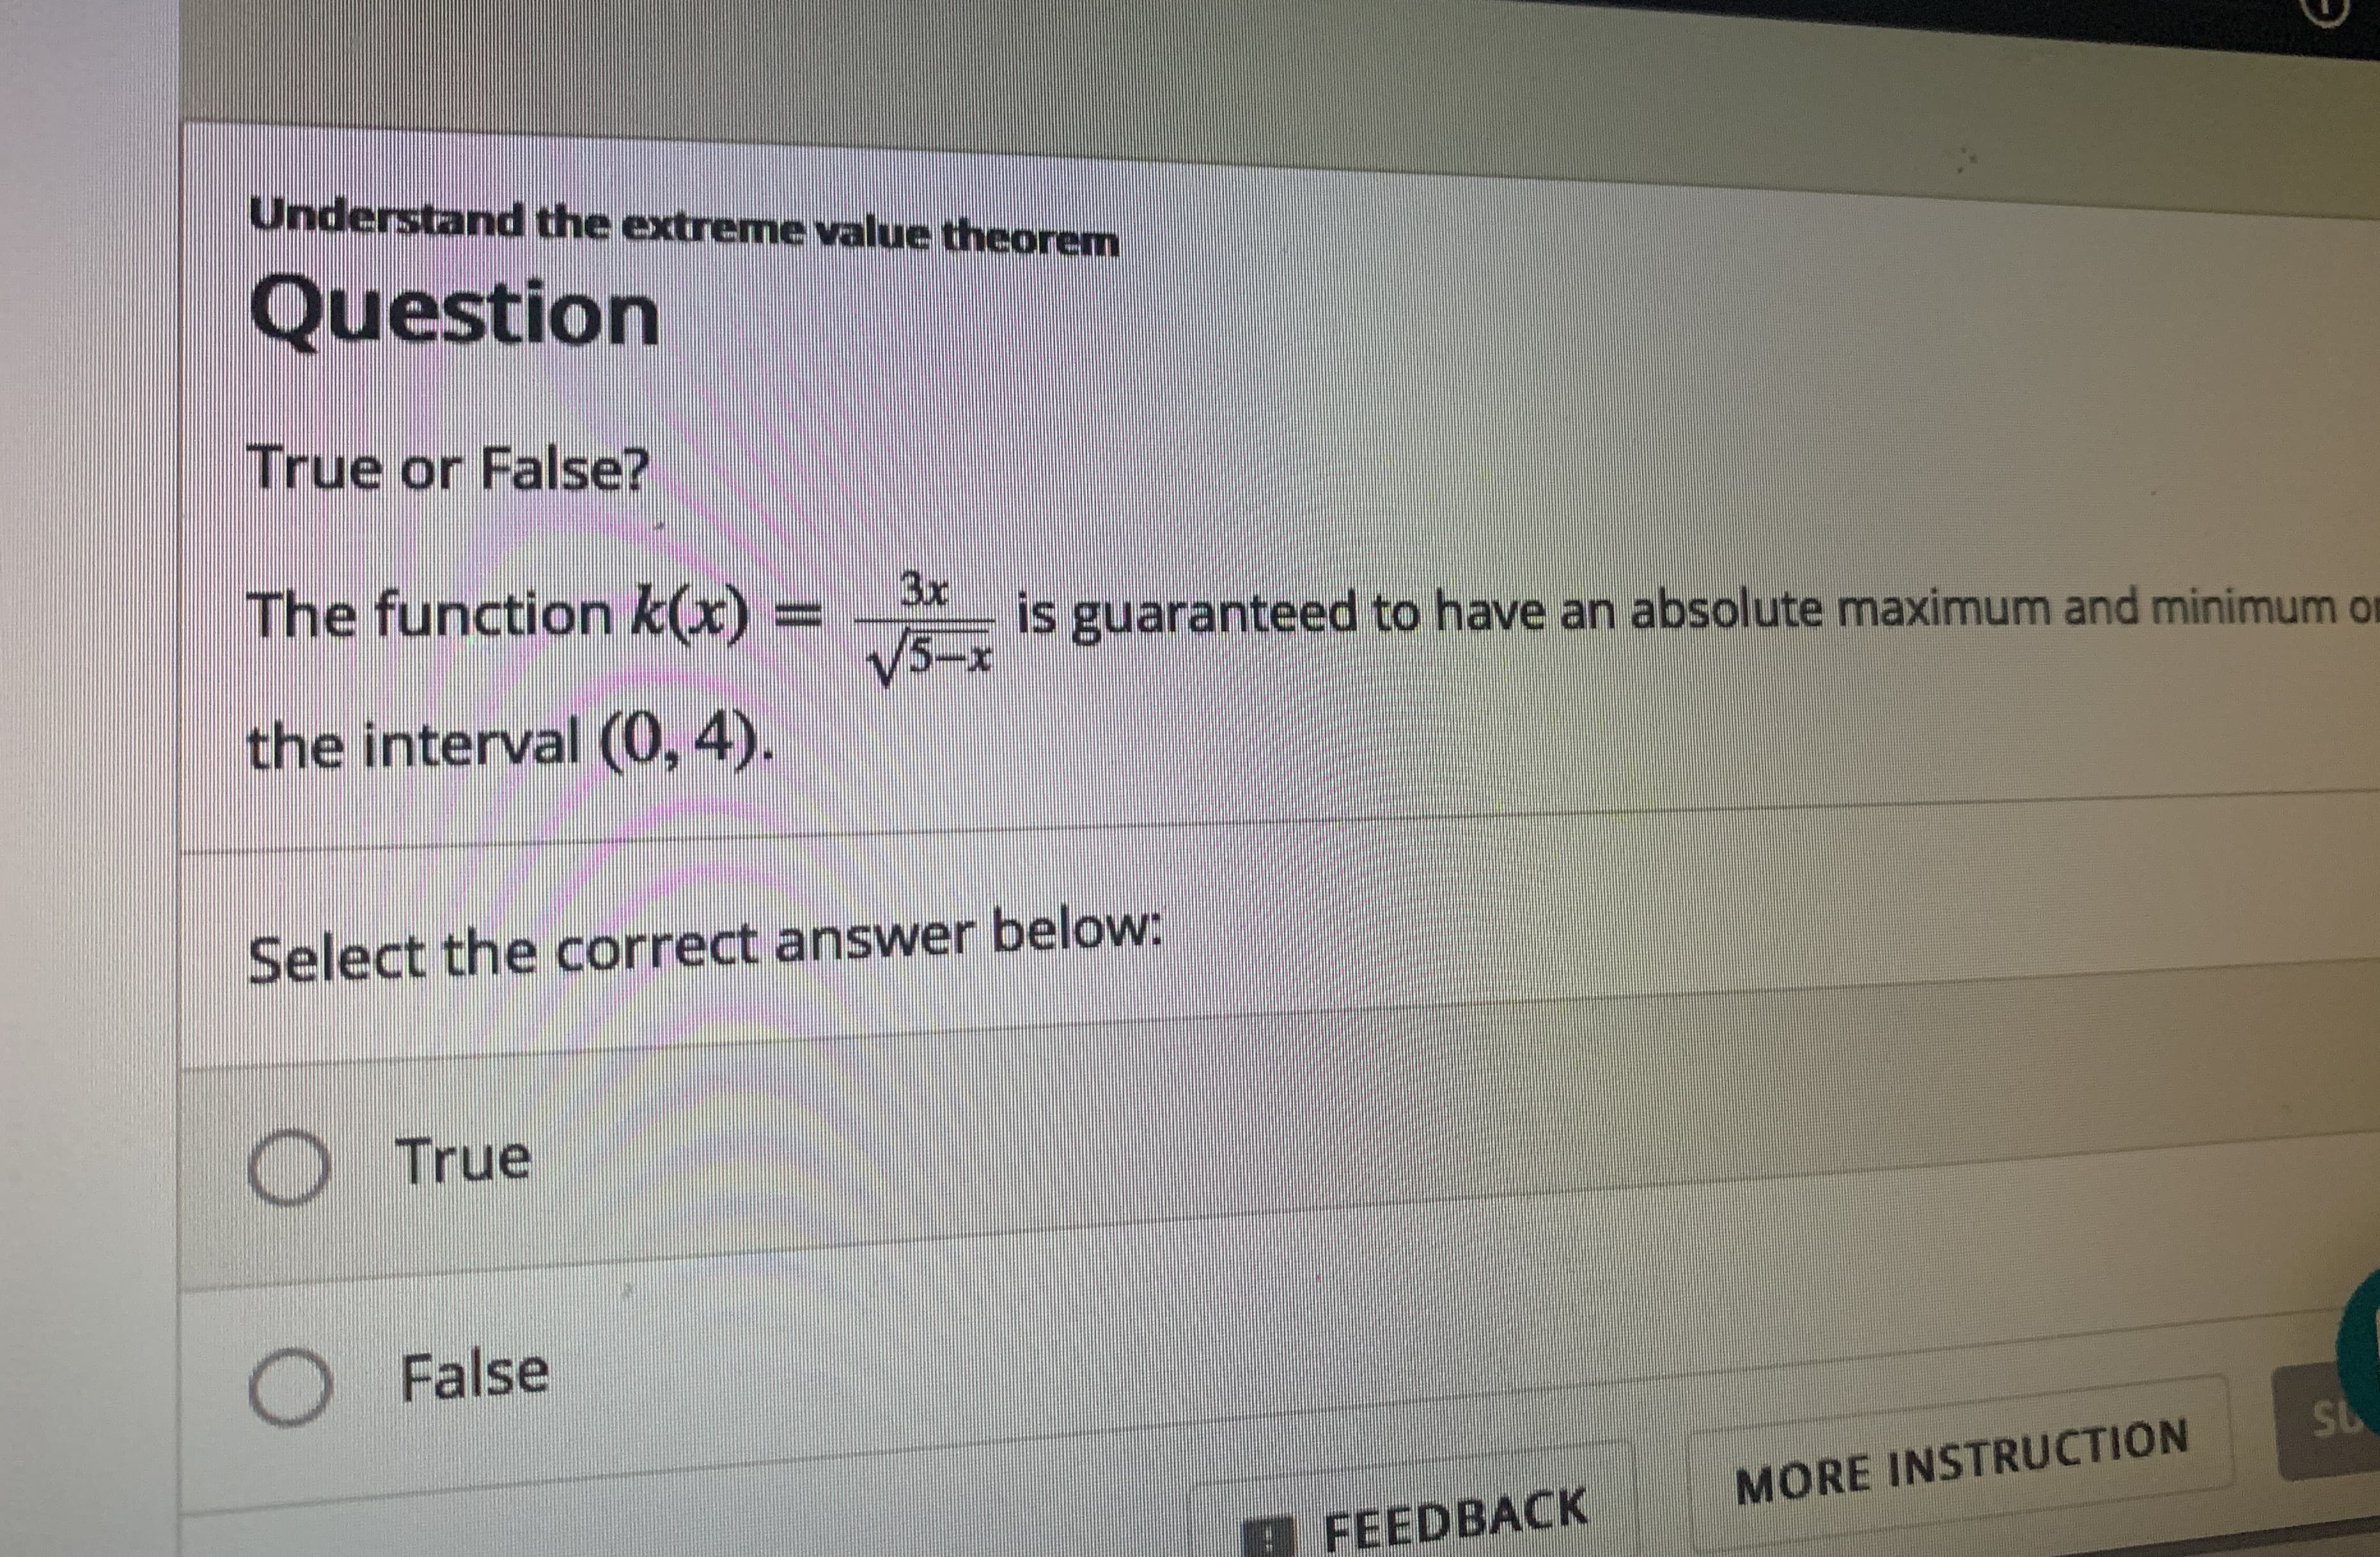 Understand the extreme value theorem
Question
True or False?
The function k(x)
3x
is guaranteed to have an absolute maximum and minimum o
%3D
V3-x
the interval (0, 4).
Select the correct answer below:
True
O False
SL
MORE INSTRUCTION
E FEEDBACK
